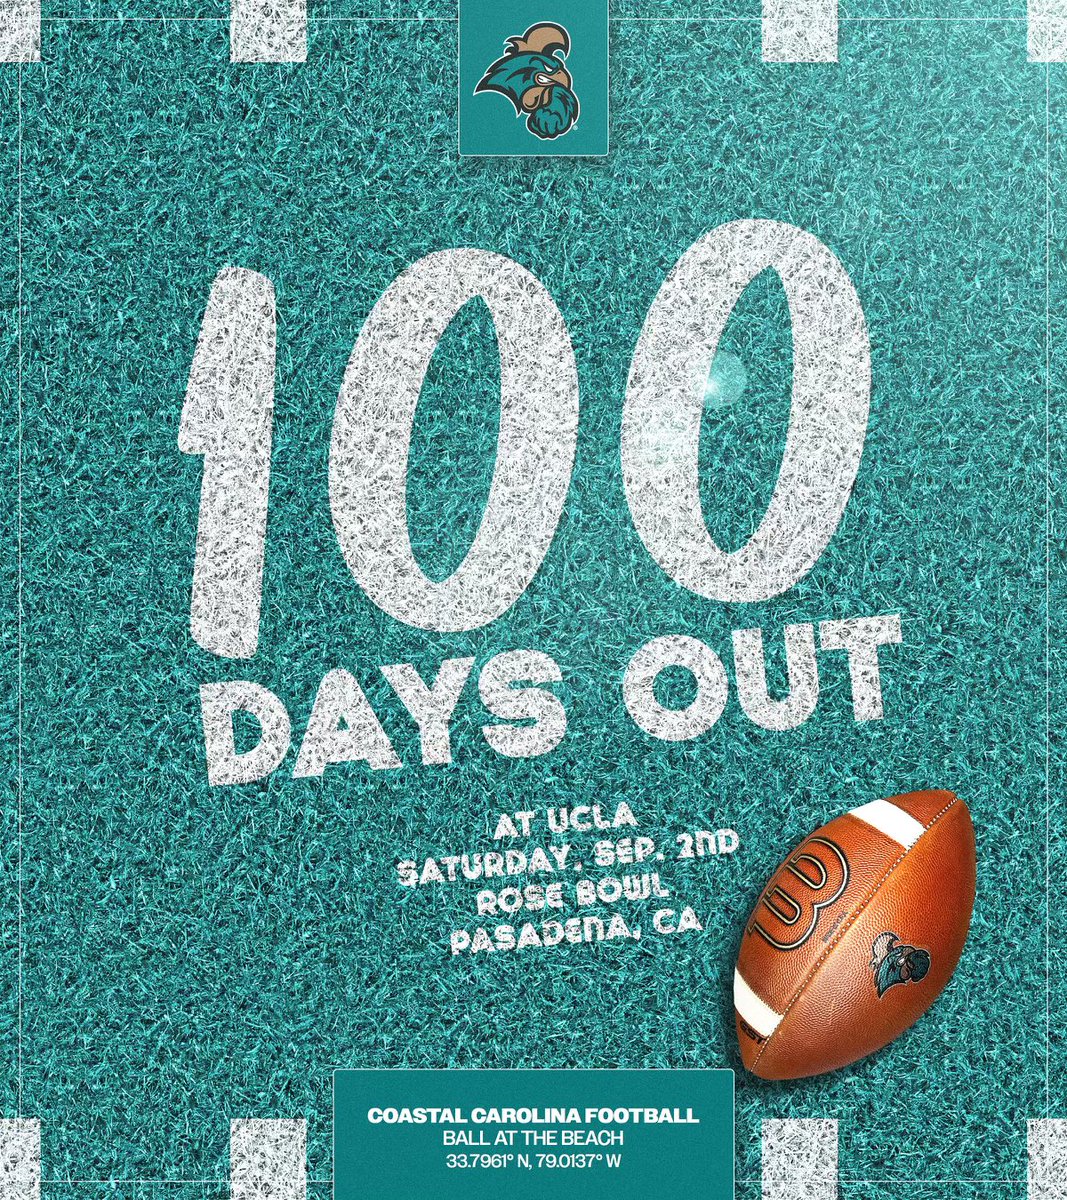 #TEALNATION … Are you ready for some FOOTBALL 🏈 !!!  #CHANTSUP 👌🏽  #FAM1LY